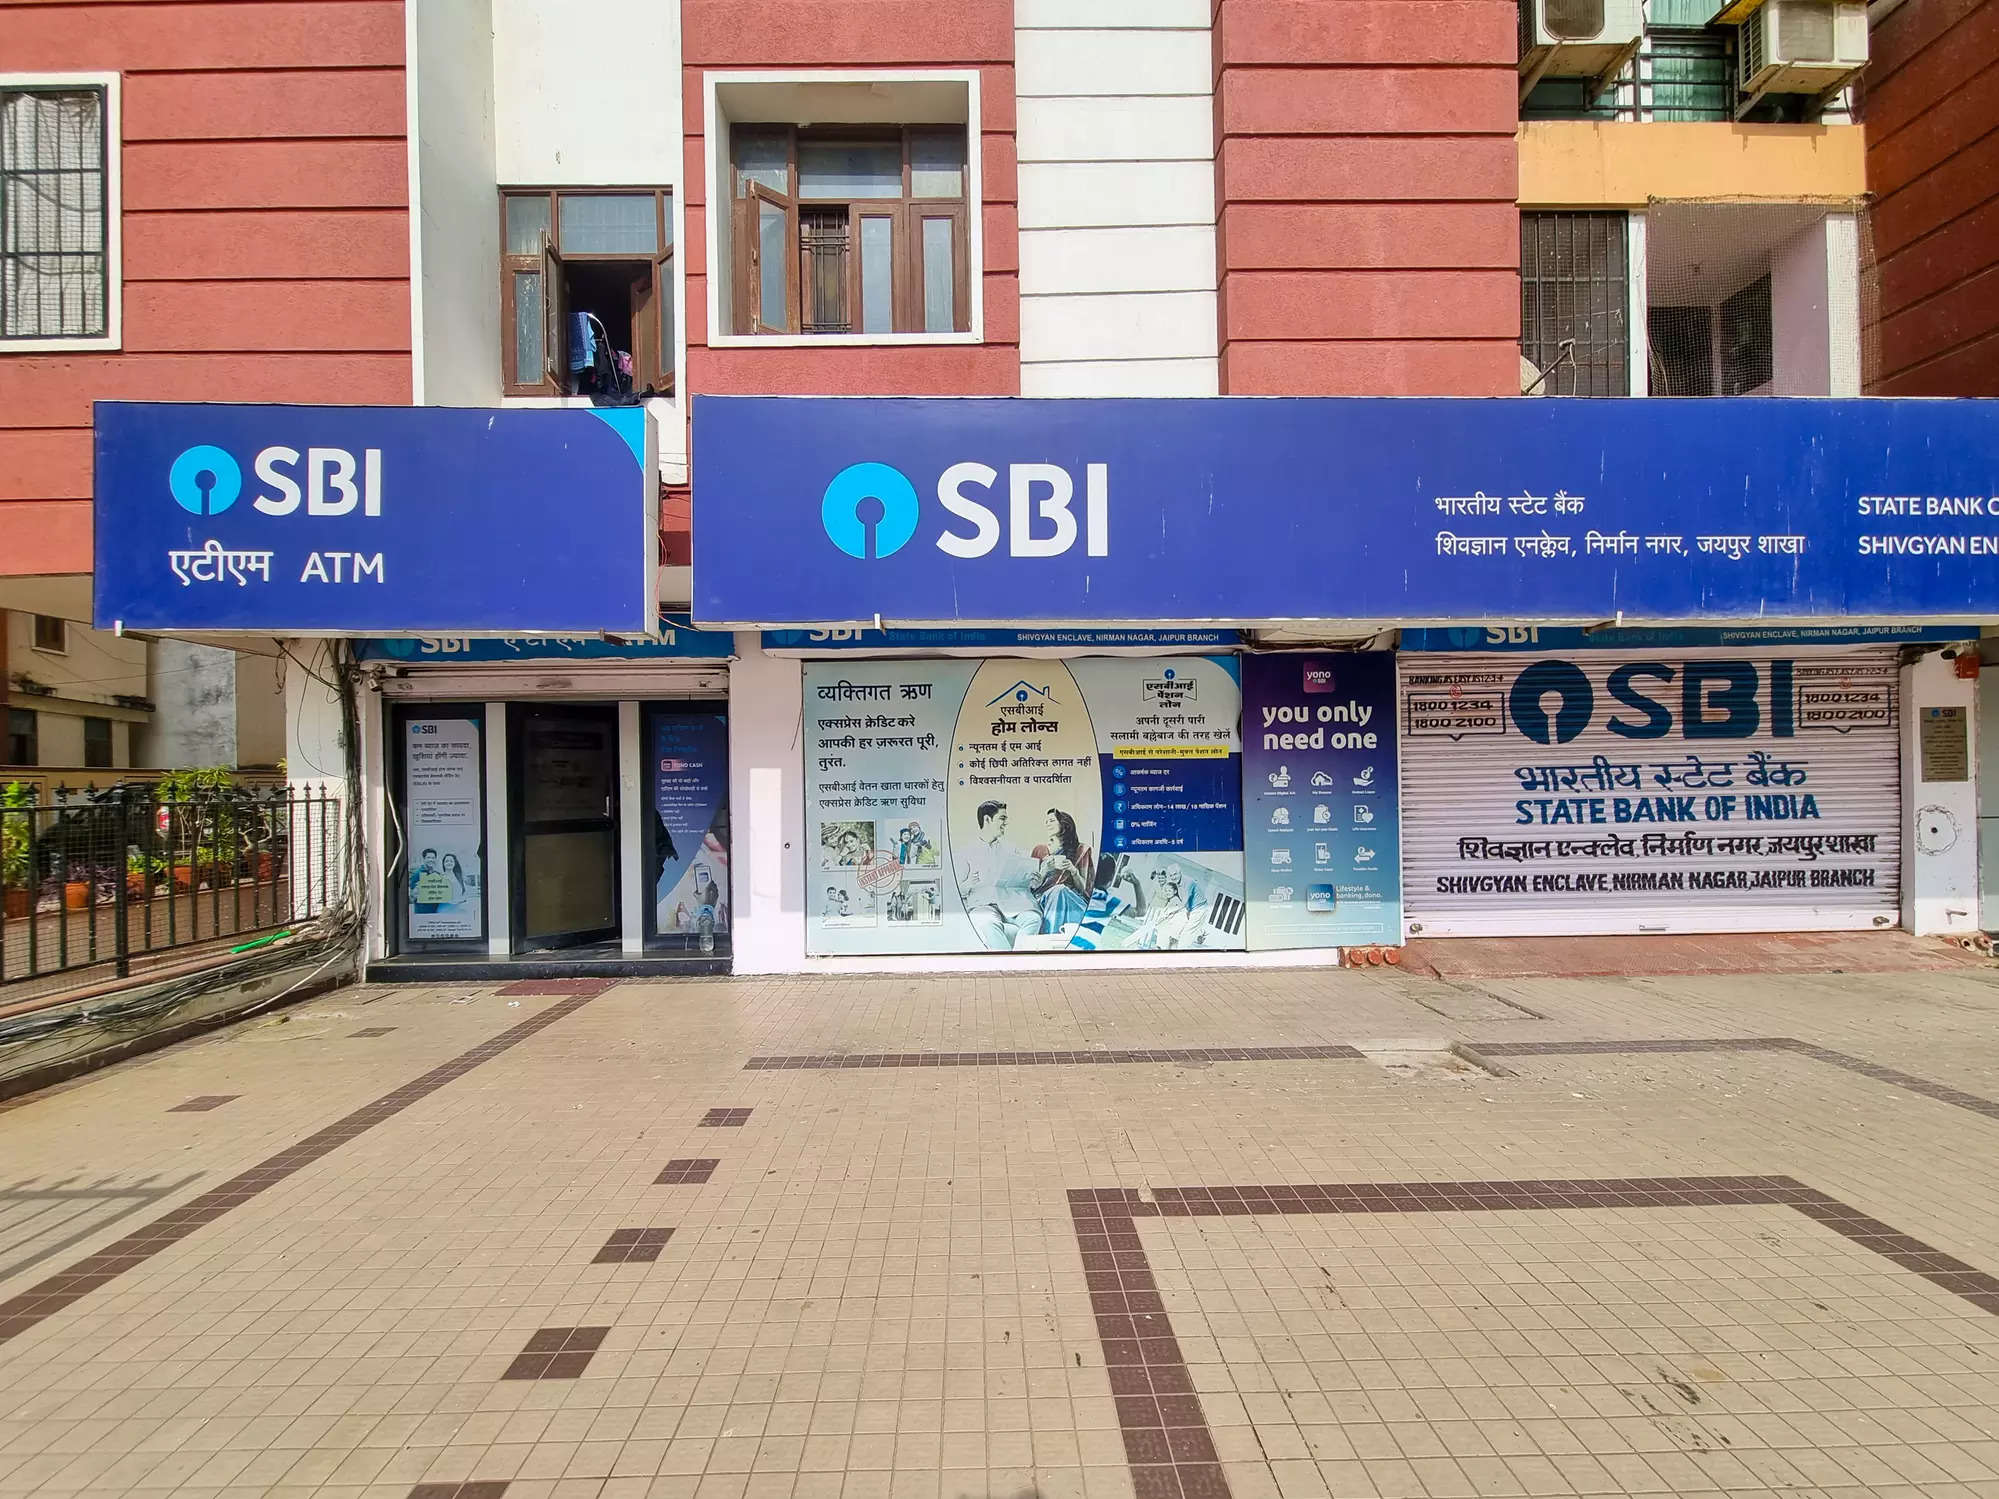 SBI approves Rs 25,000 crore fundraising plan via issue of Tier 1 and Tier 2 bonds 